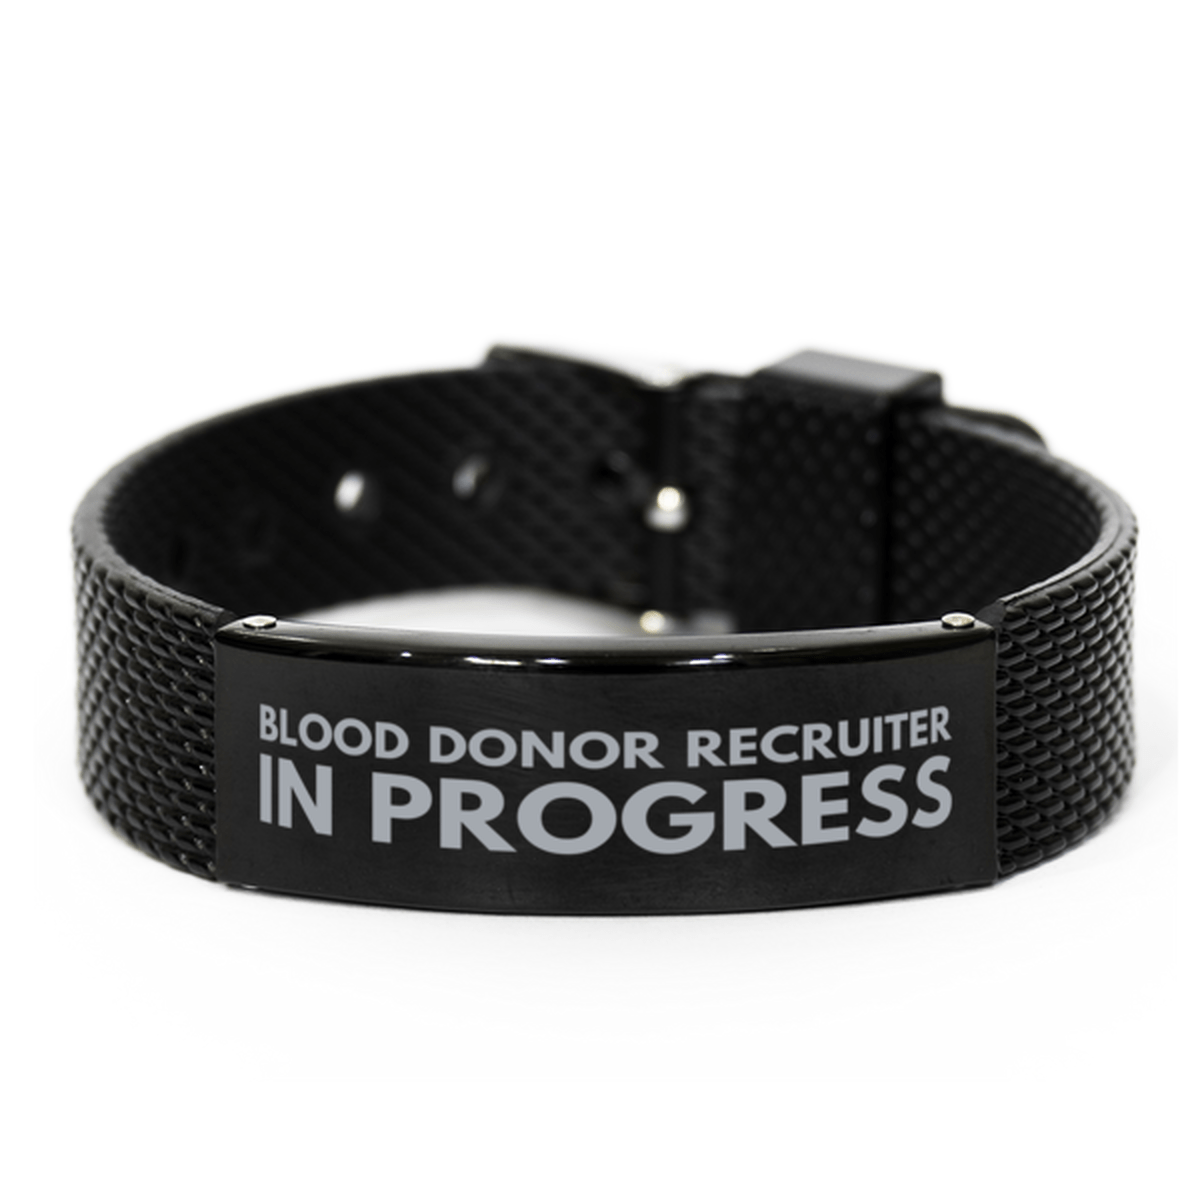 Inspirational Blood Donor Recruiter Black Shark Mesh Bracelet, Blood Donor Recruiter In Progress, Best Graduation Gifts for Students